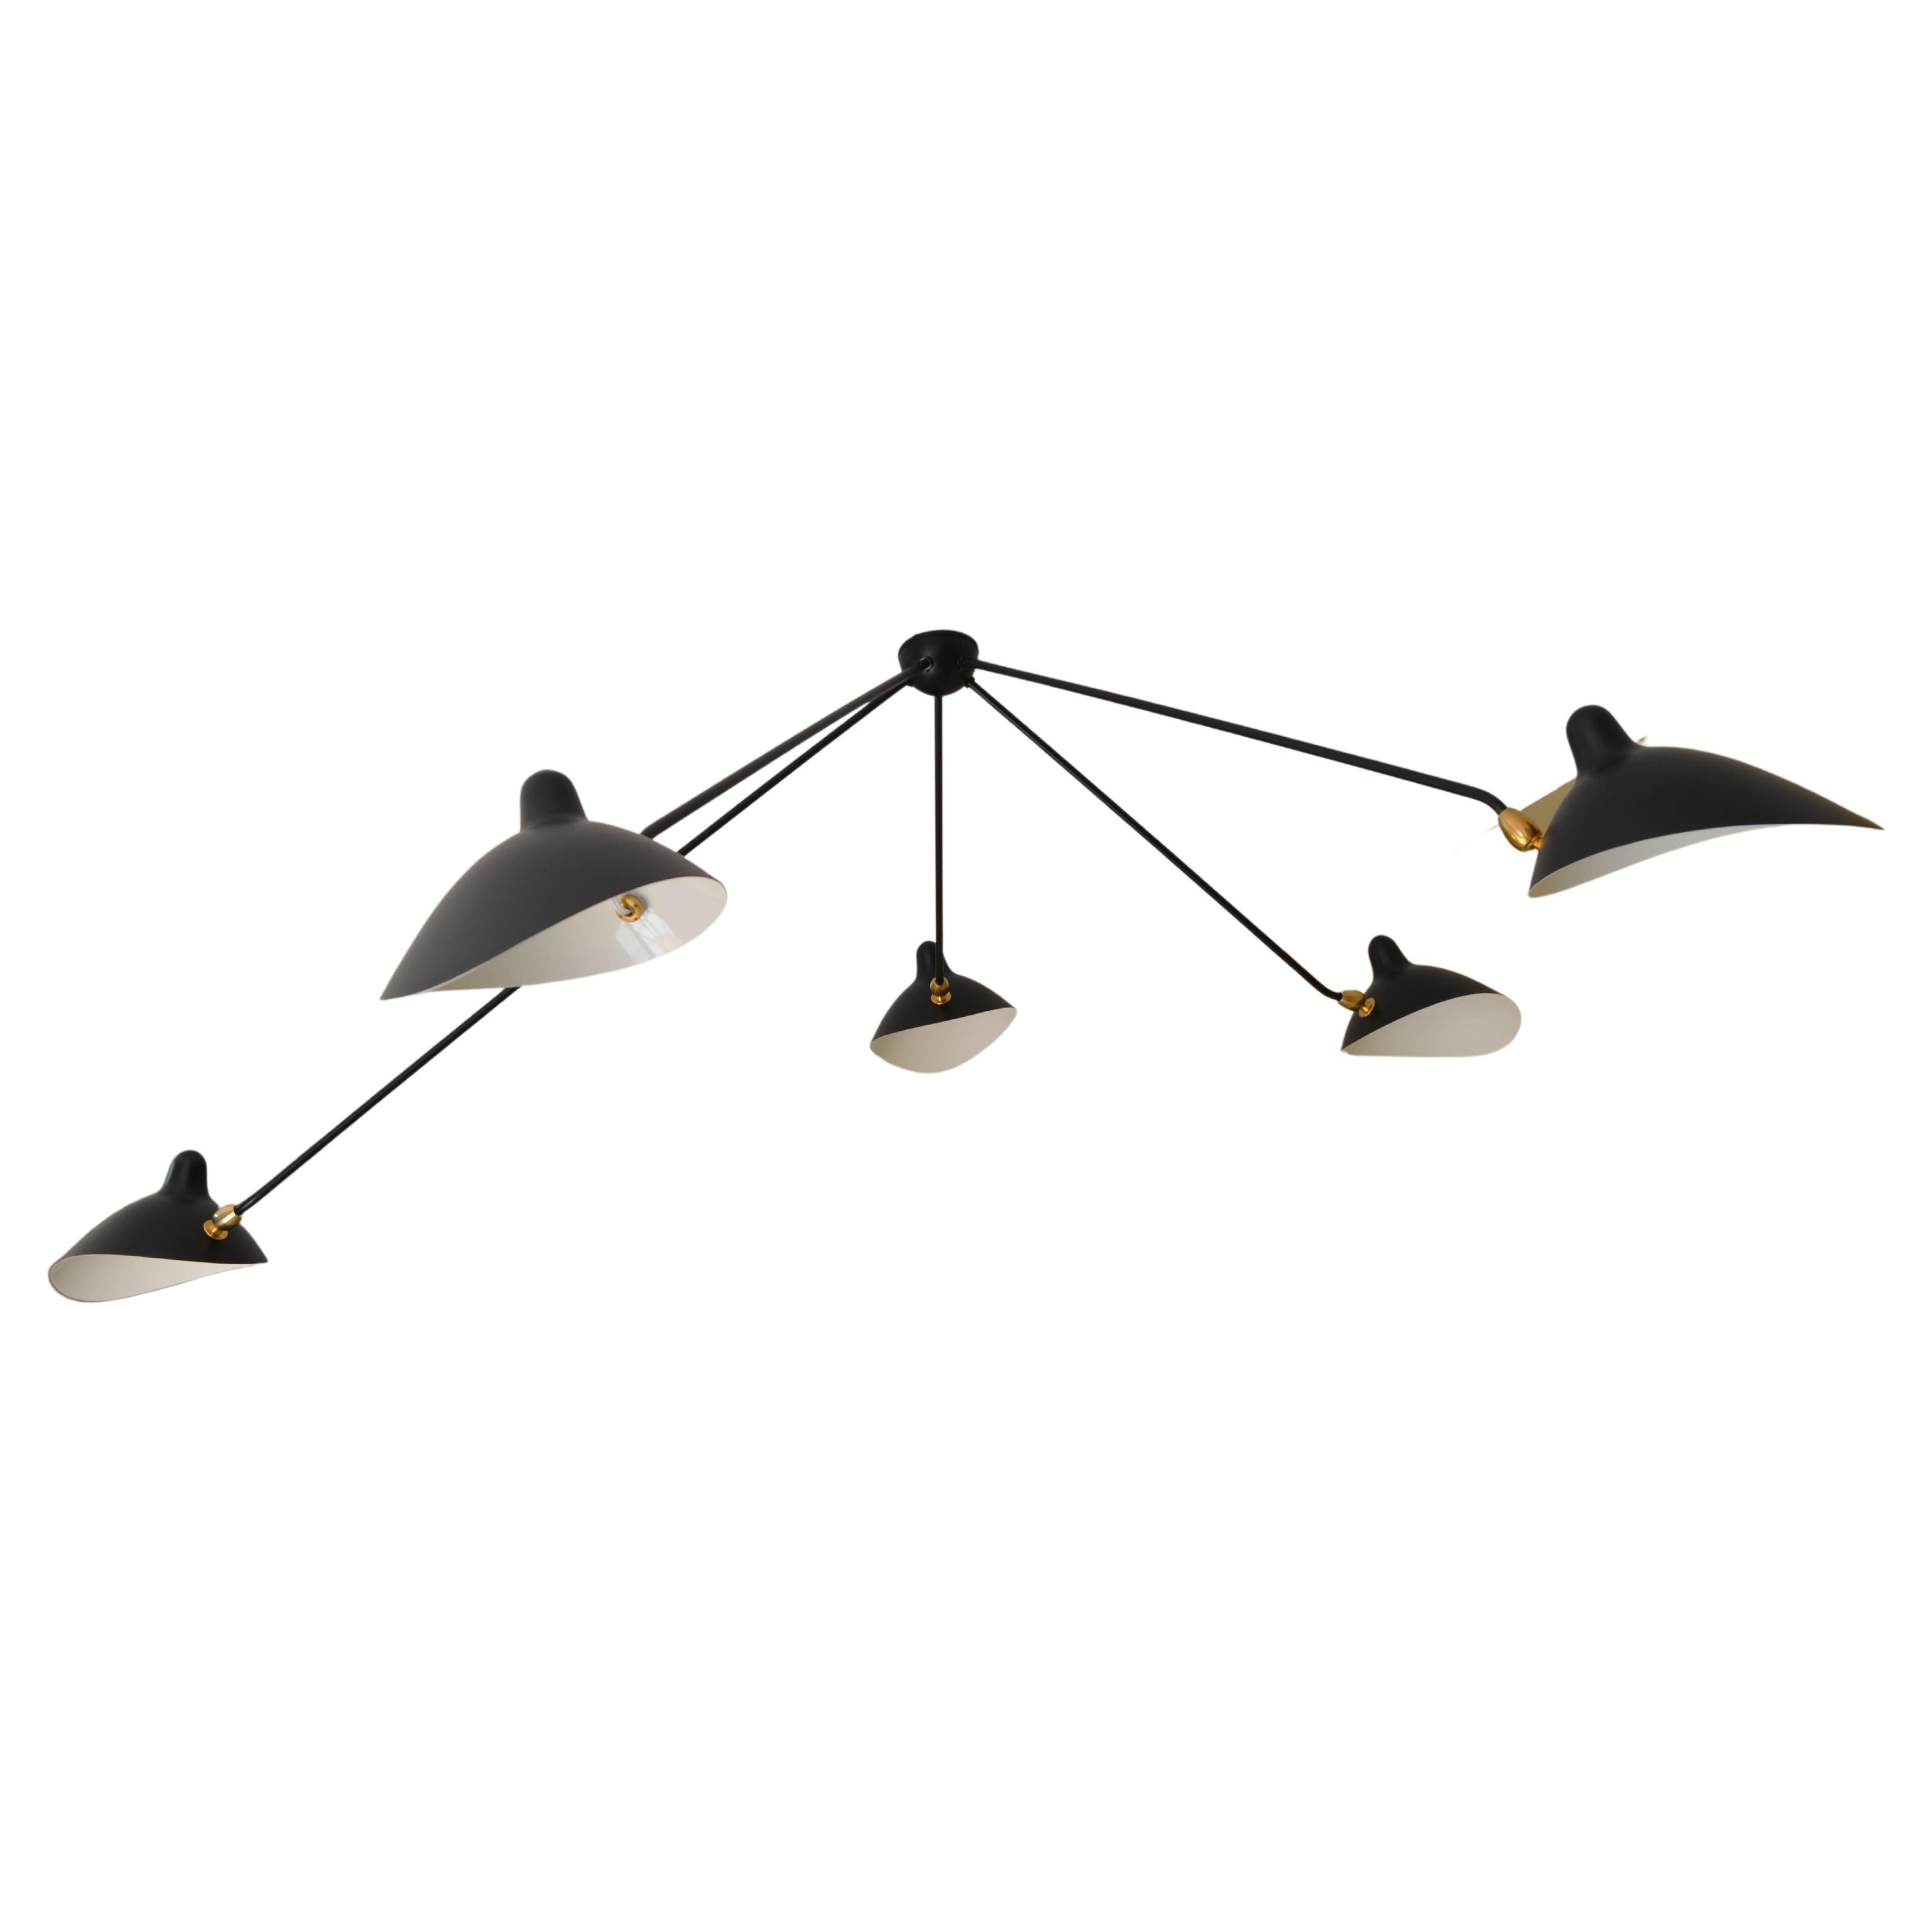 Serge Mouille - Black or White Spider Ceiling Lamp with 5 Arms - IN STOCK!